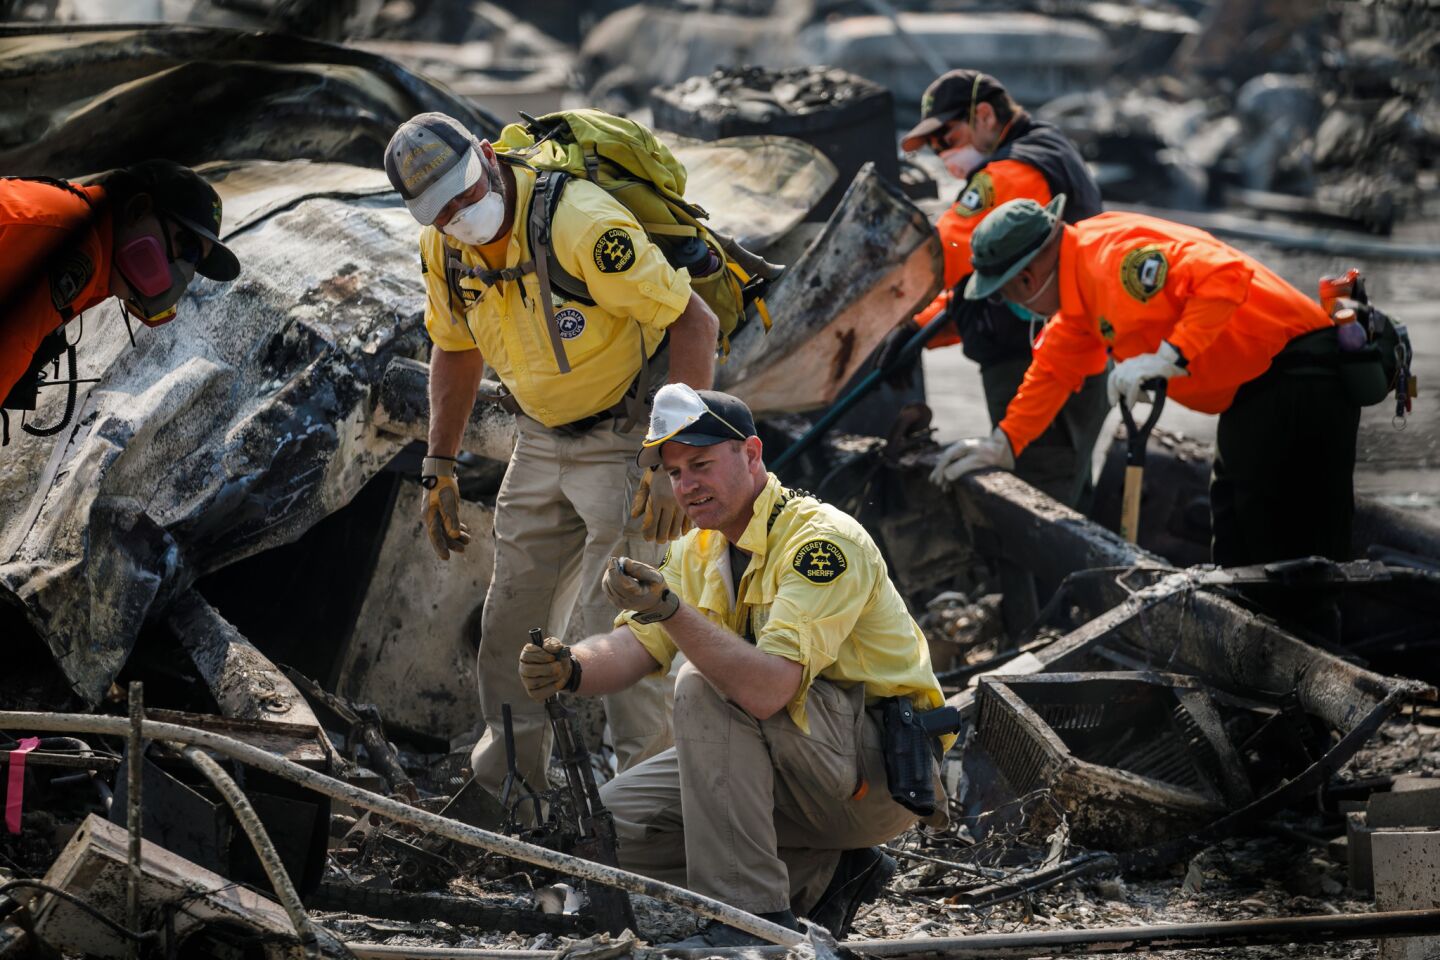 A worker pulls out a firearm from the burned wreckage as search team members look through the debris at the Journey's End Mobile Home Park in Santa Rosa.